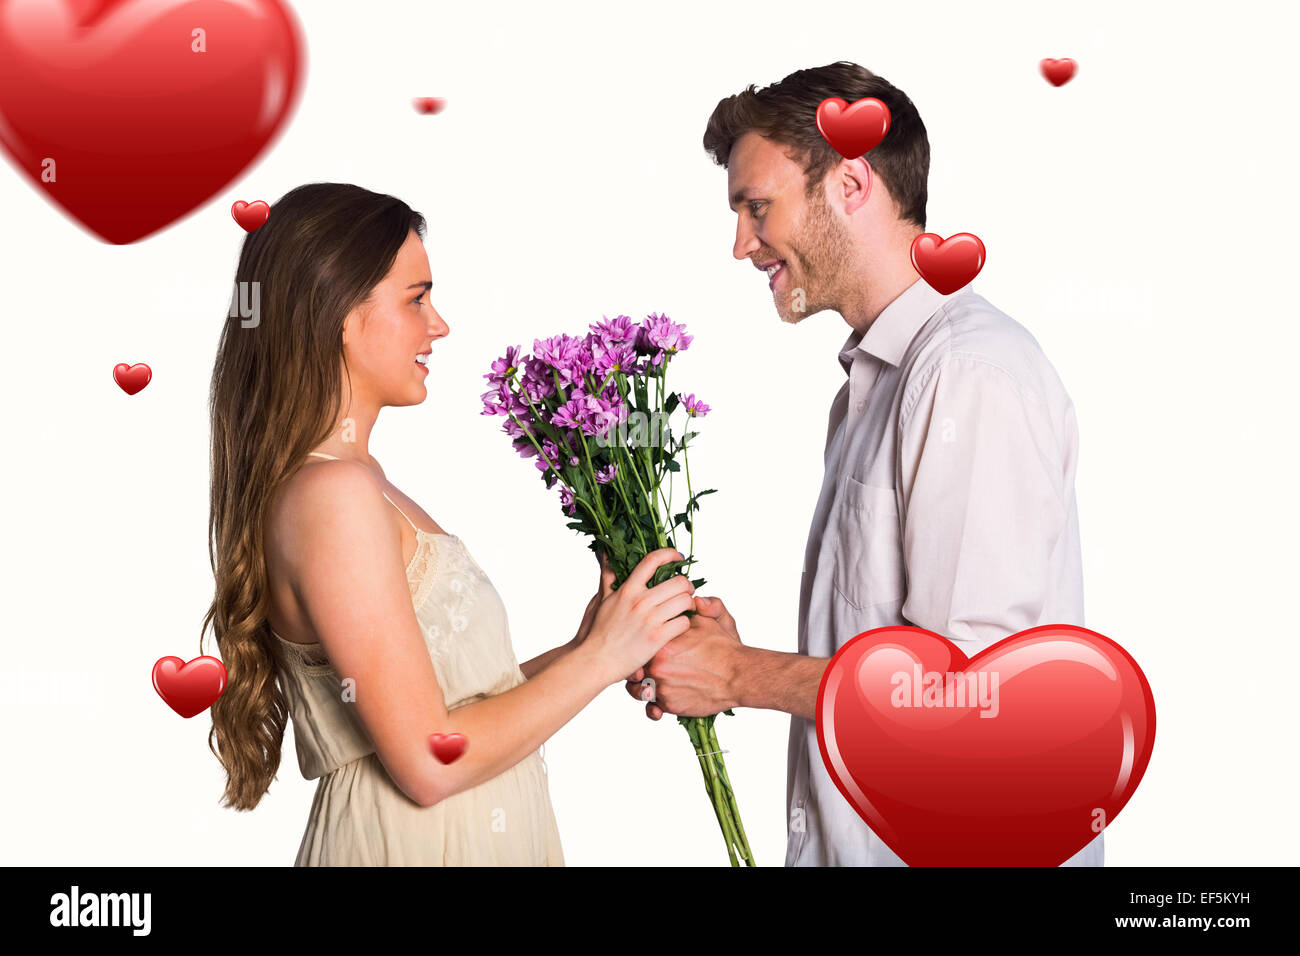 Composite image of side view of couple holding flowers Stock Photo